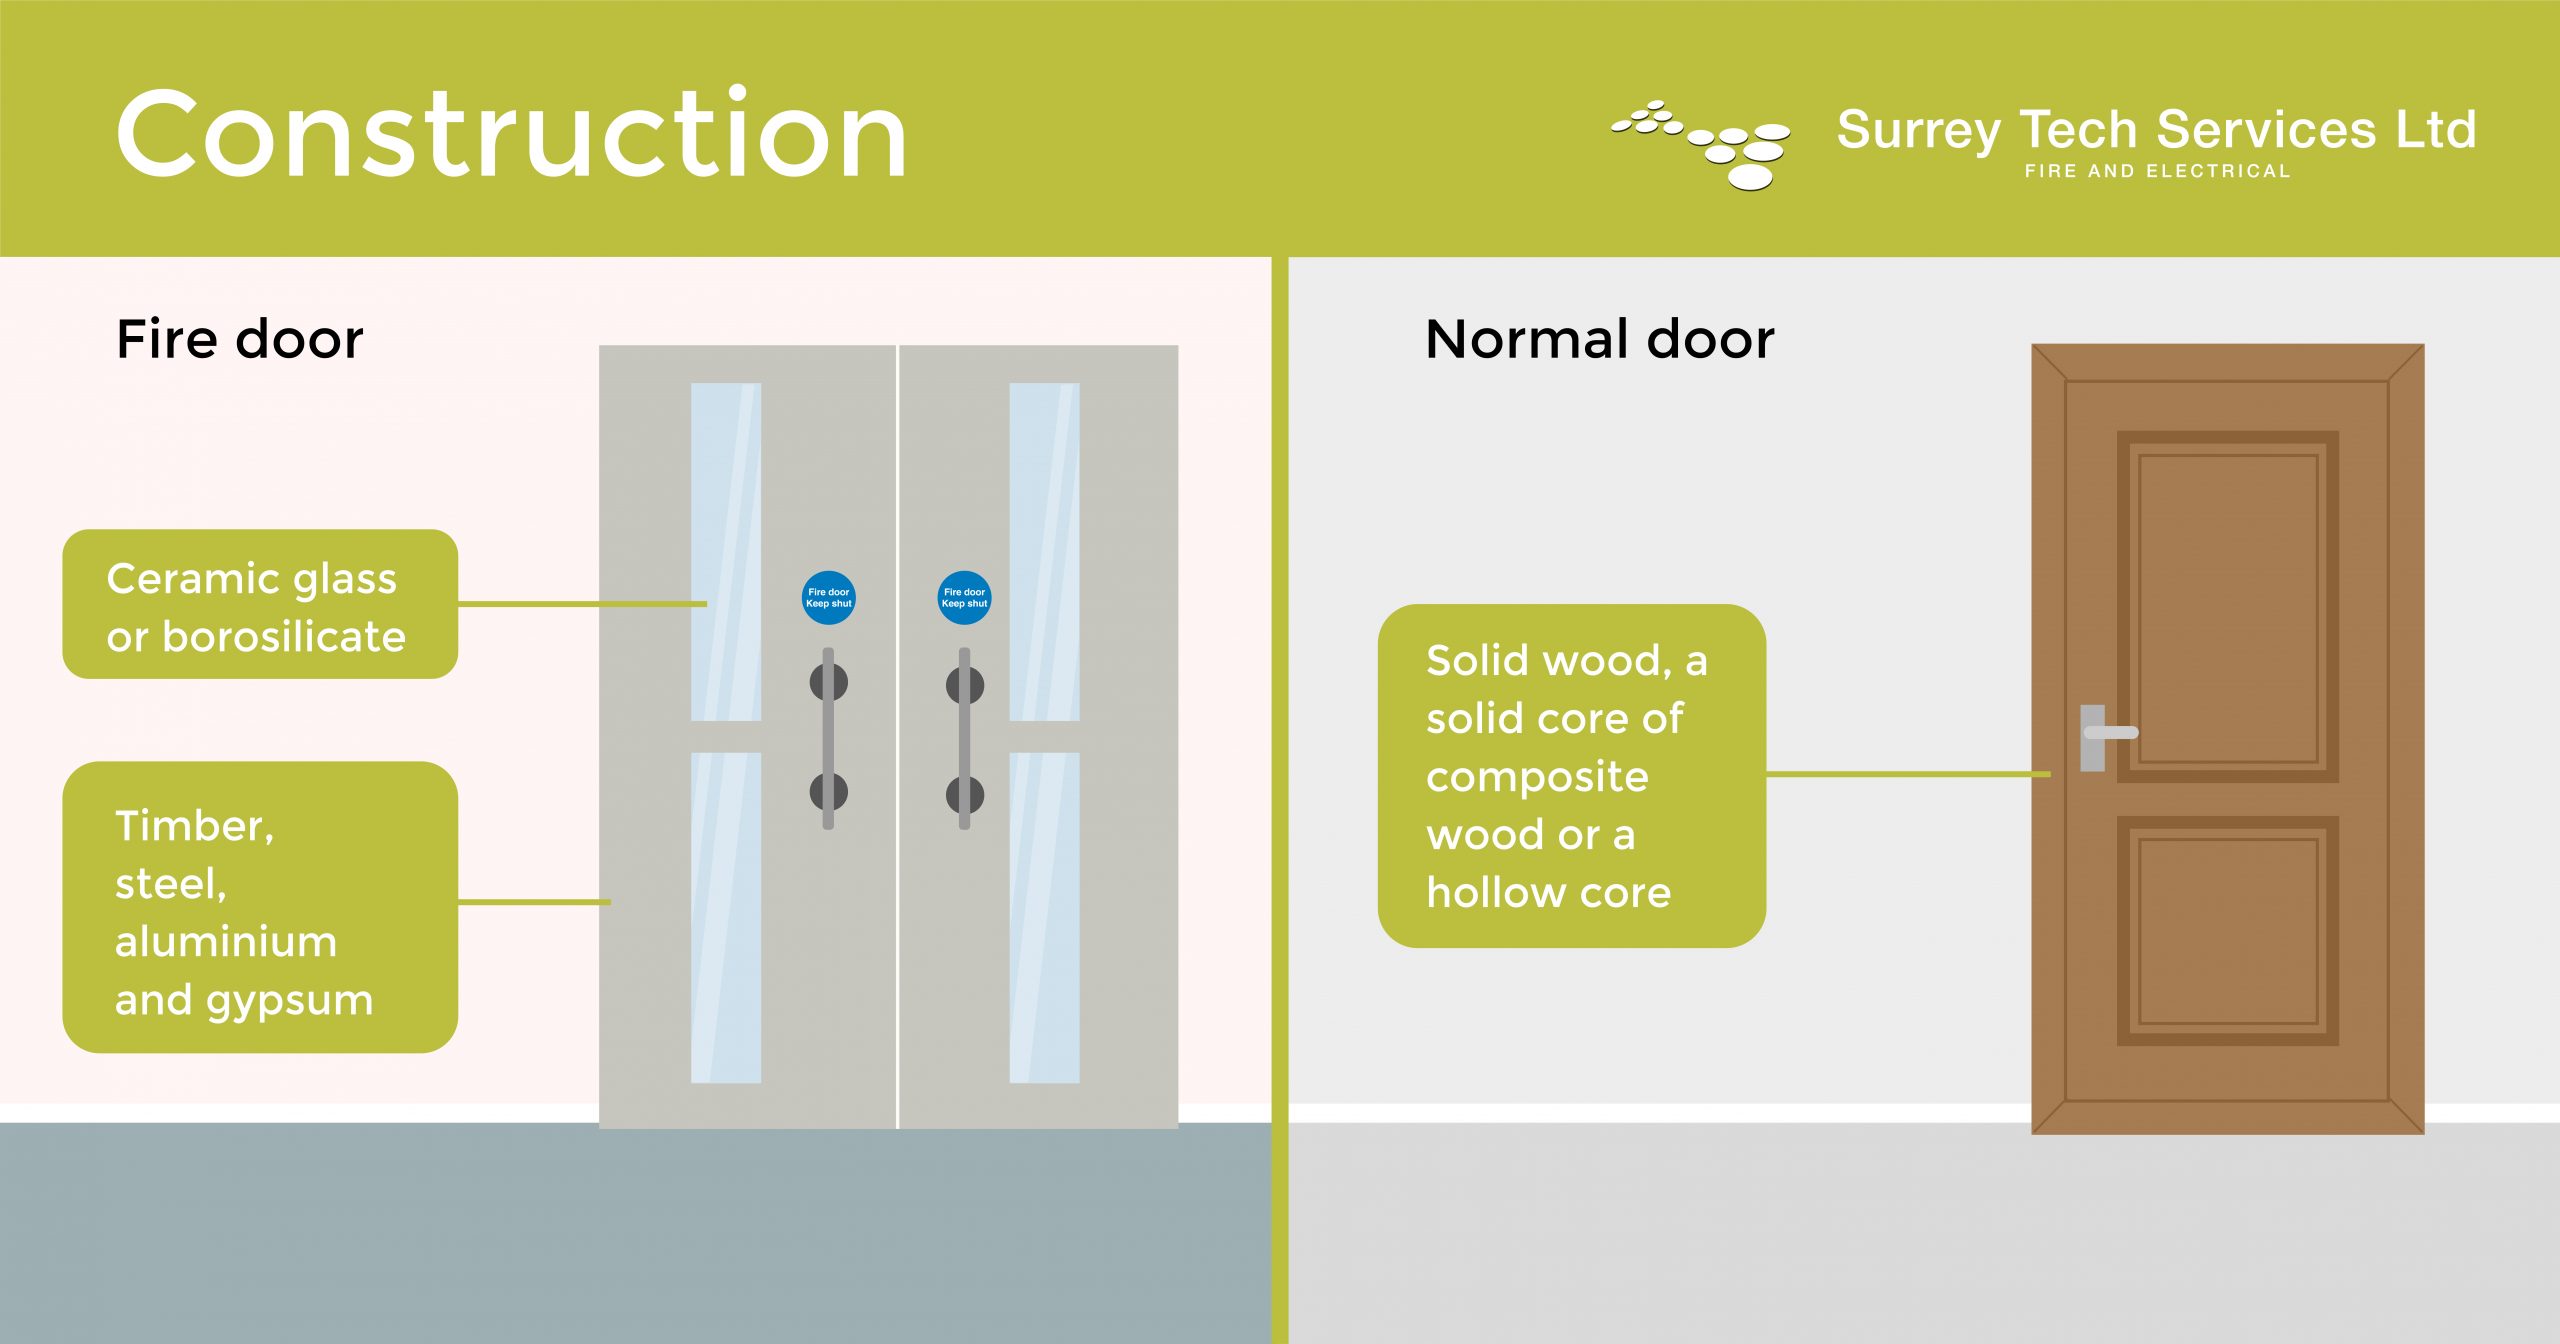 What are fire doors made of?